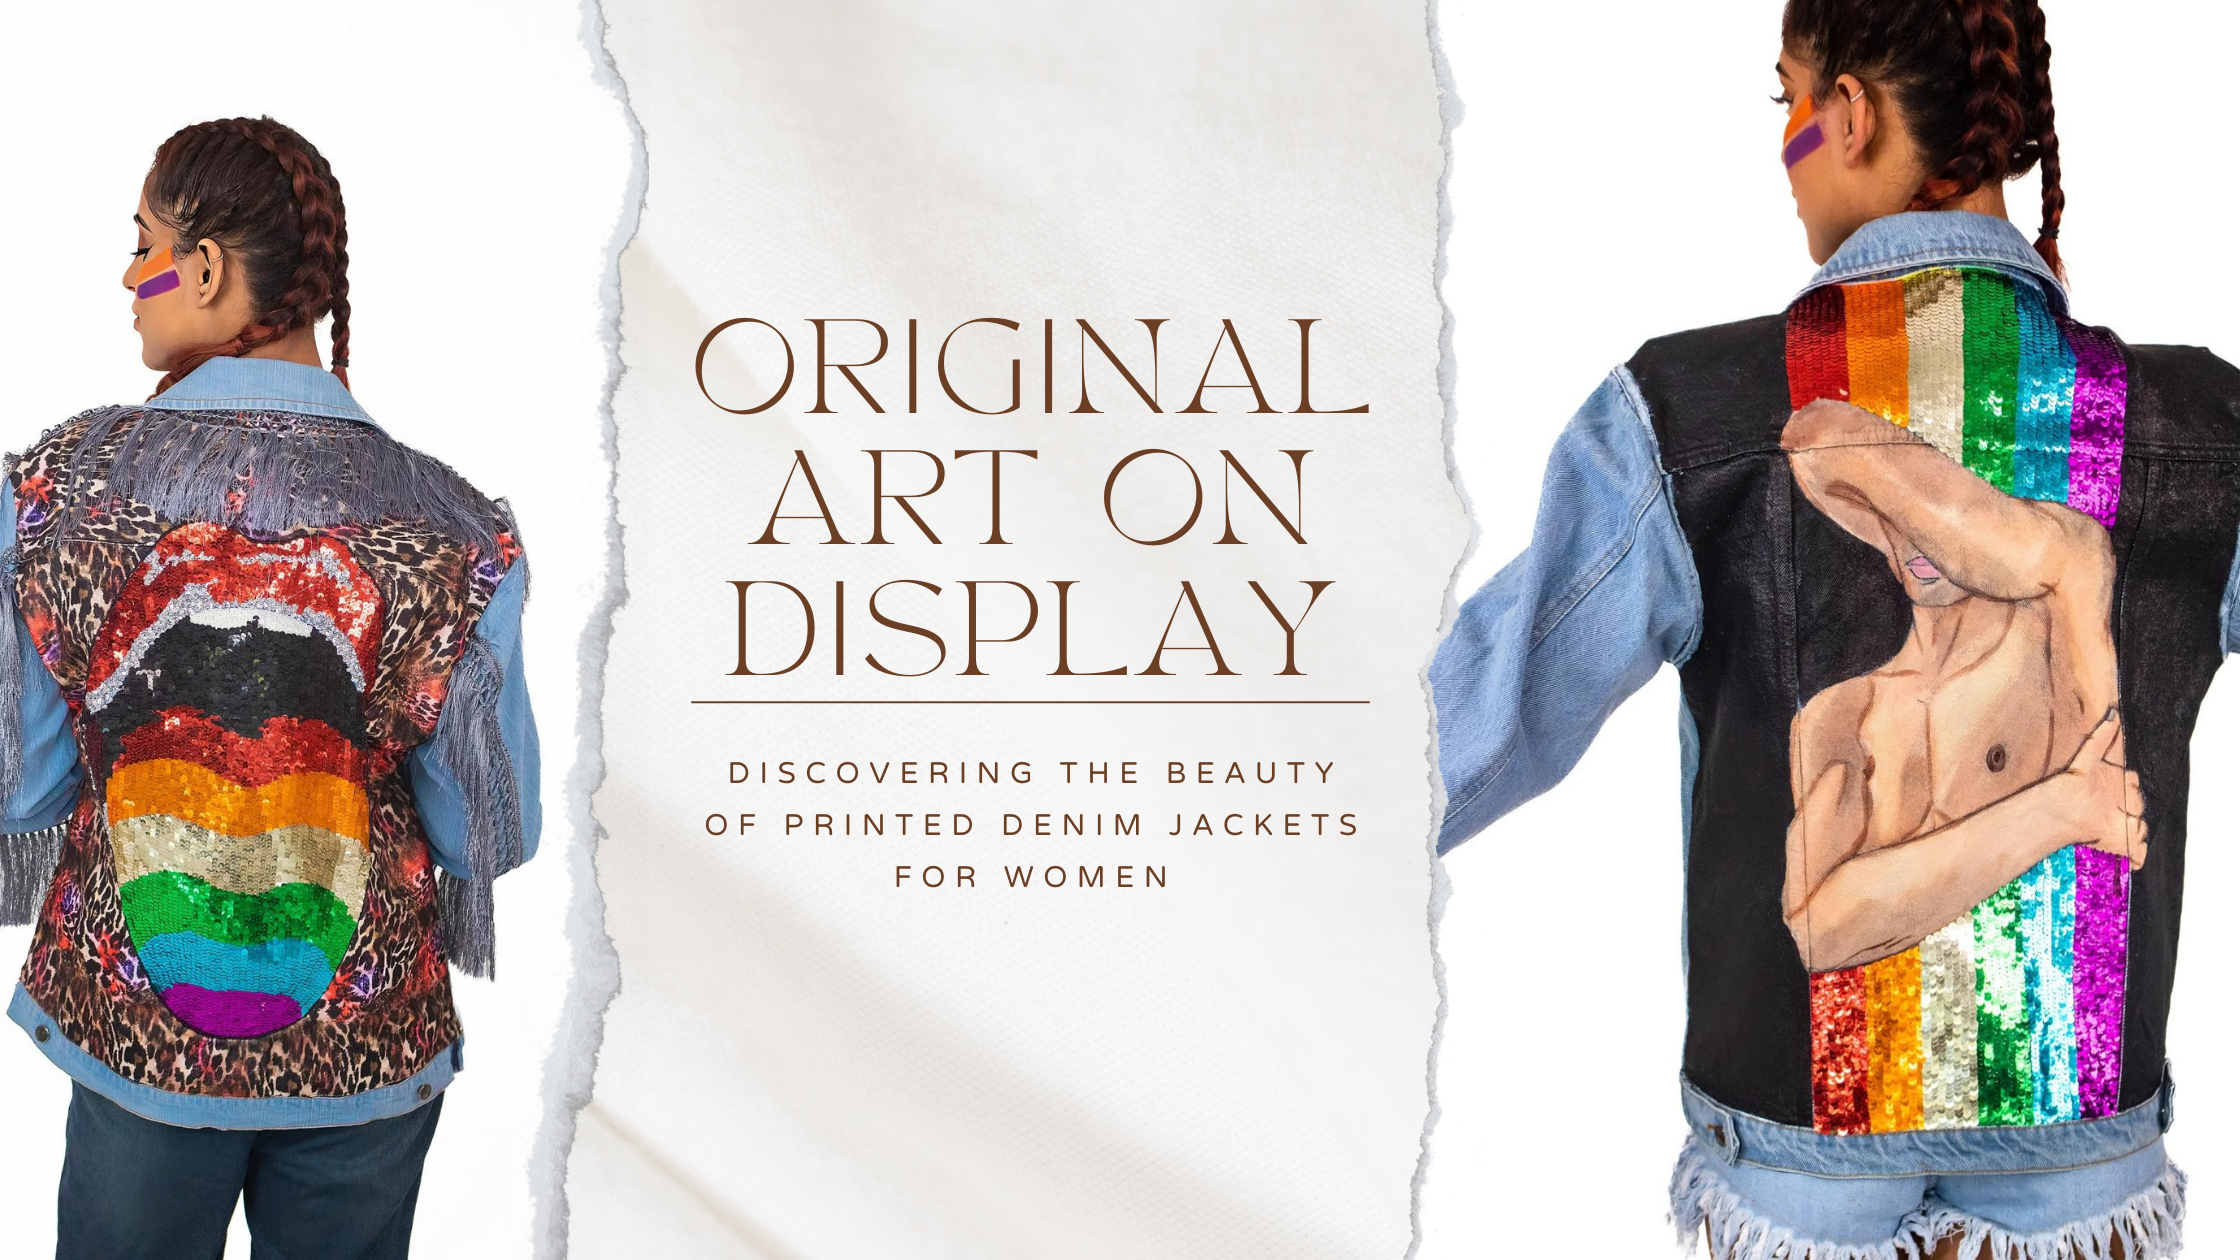 ORIGINAL ART ON DISPLAY: DISCOVERING THE BEAUTY OF PRINTED DENIM JACKETS FOR WOMEN